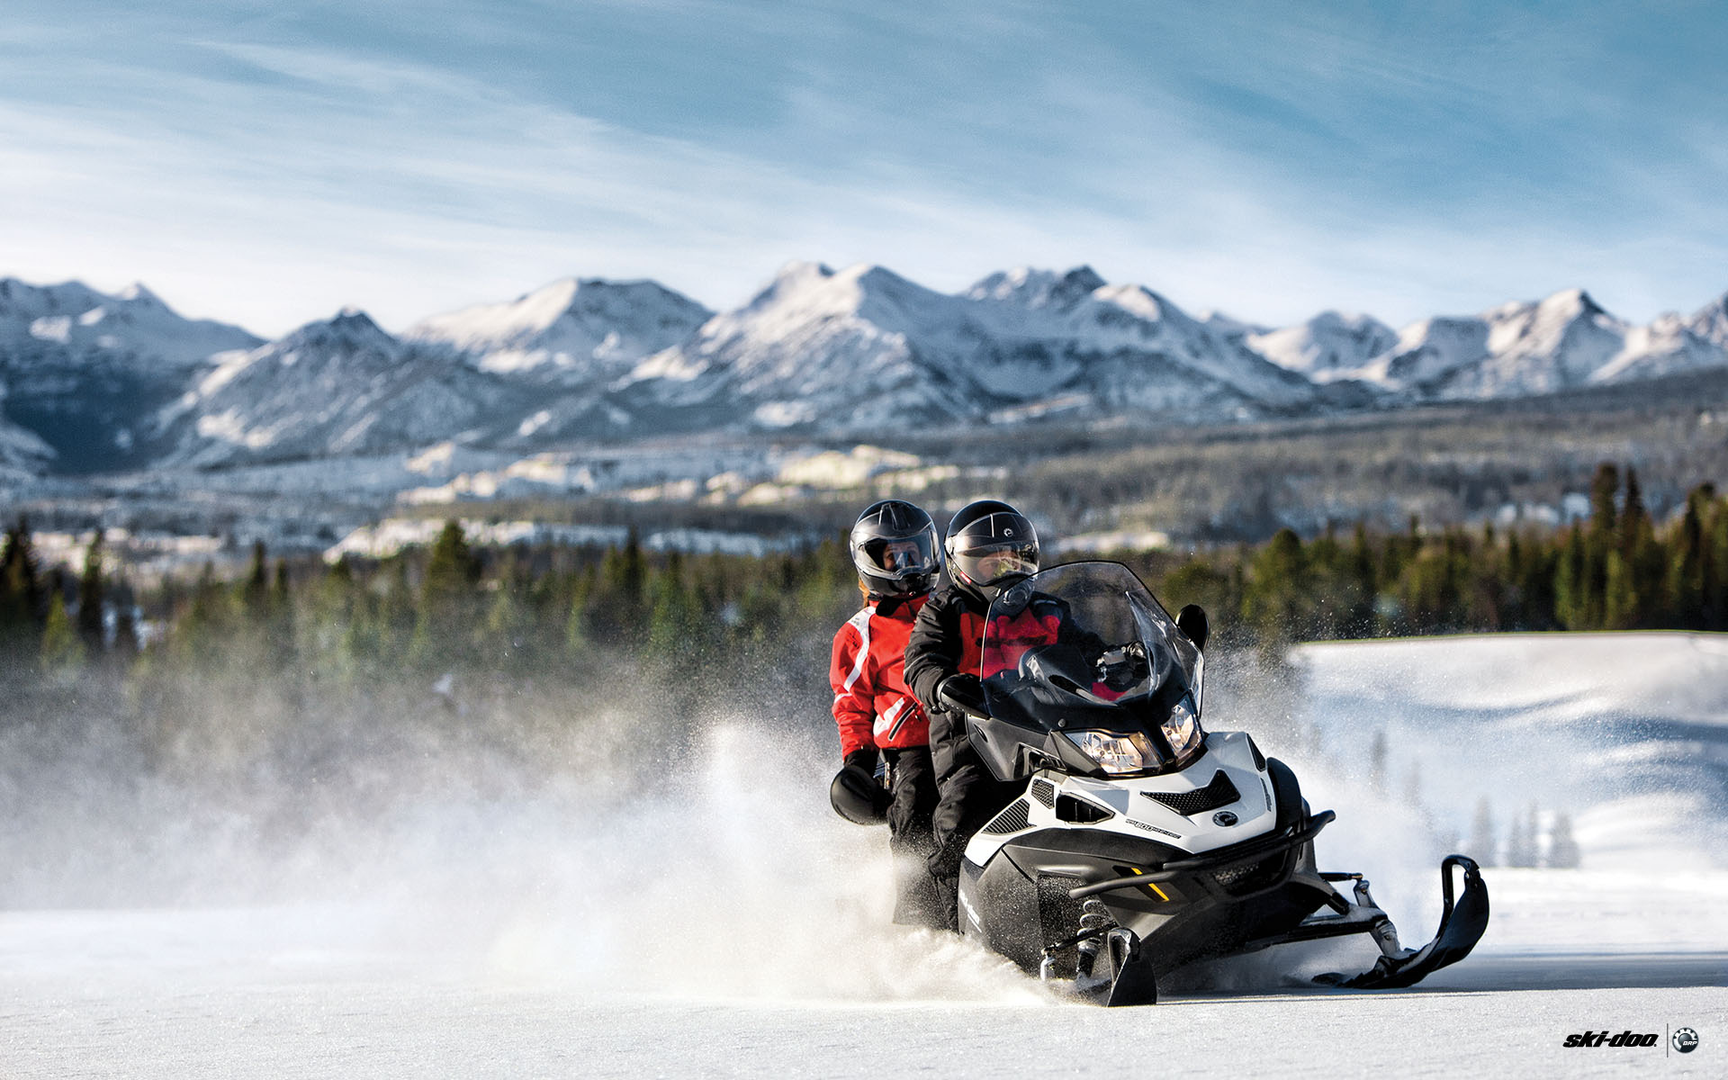 Ski doo expedition 1200. BRP Expedition 1200. Снегоход BRP 1200 Expedition. BRP Ski-Doo Expedition se 1200.